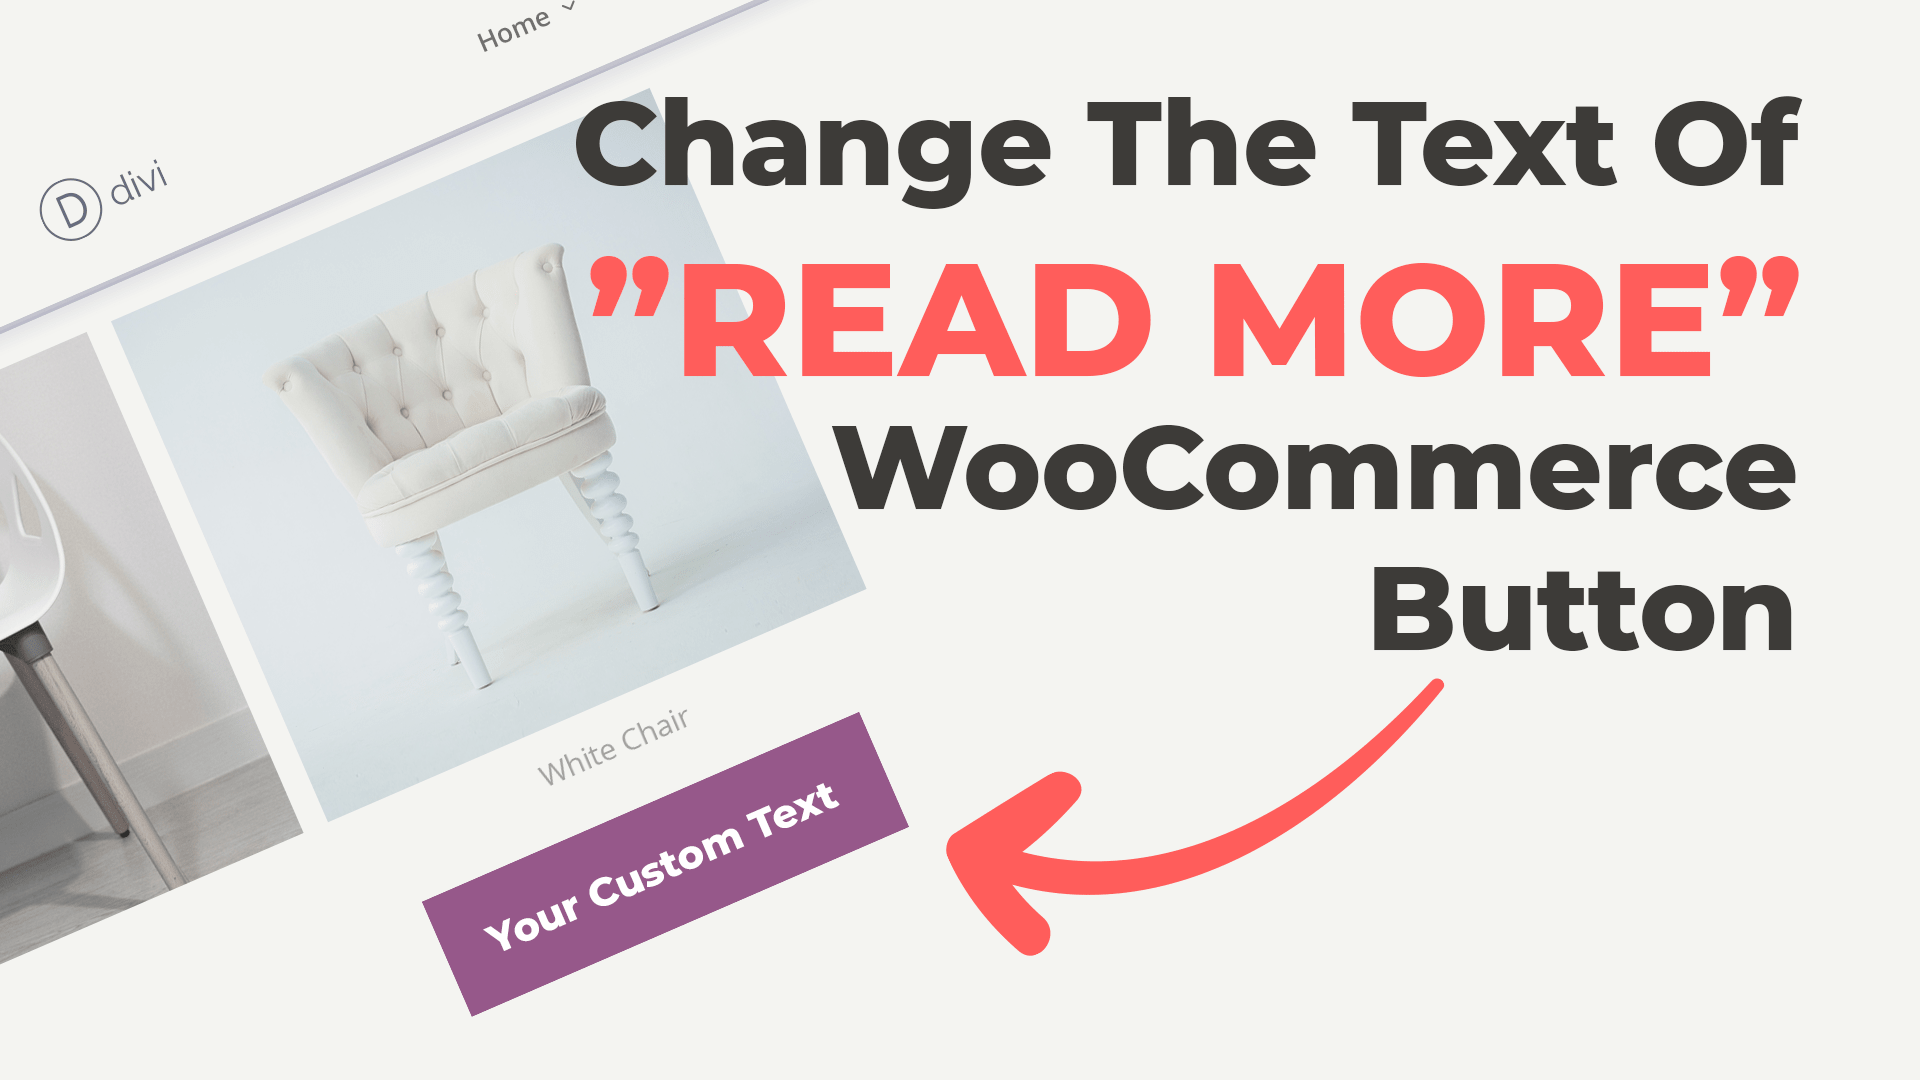 Change The “Read More” Text of the WooCommerce Button